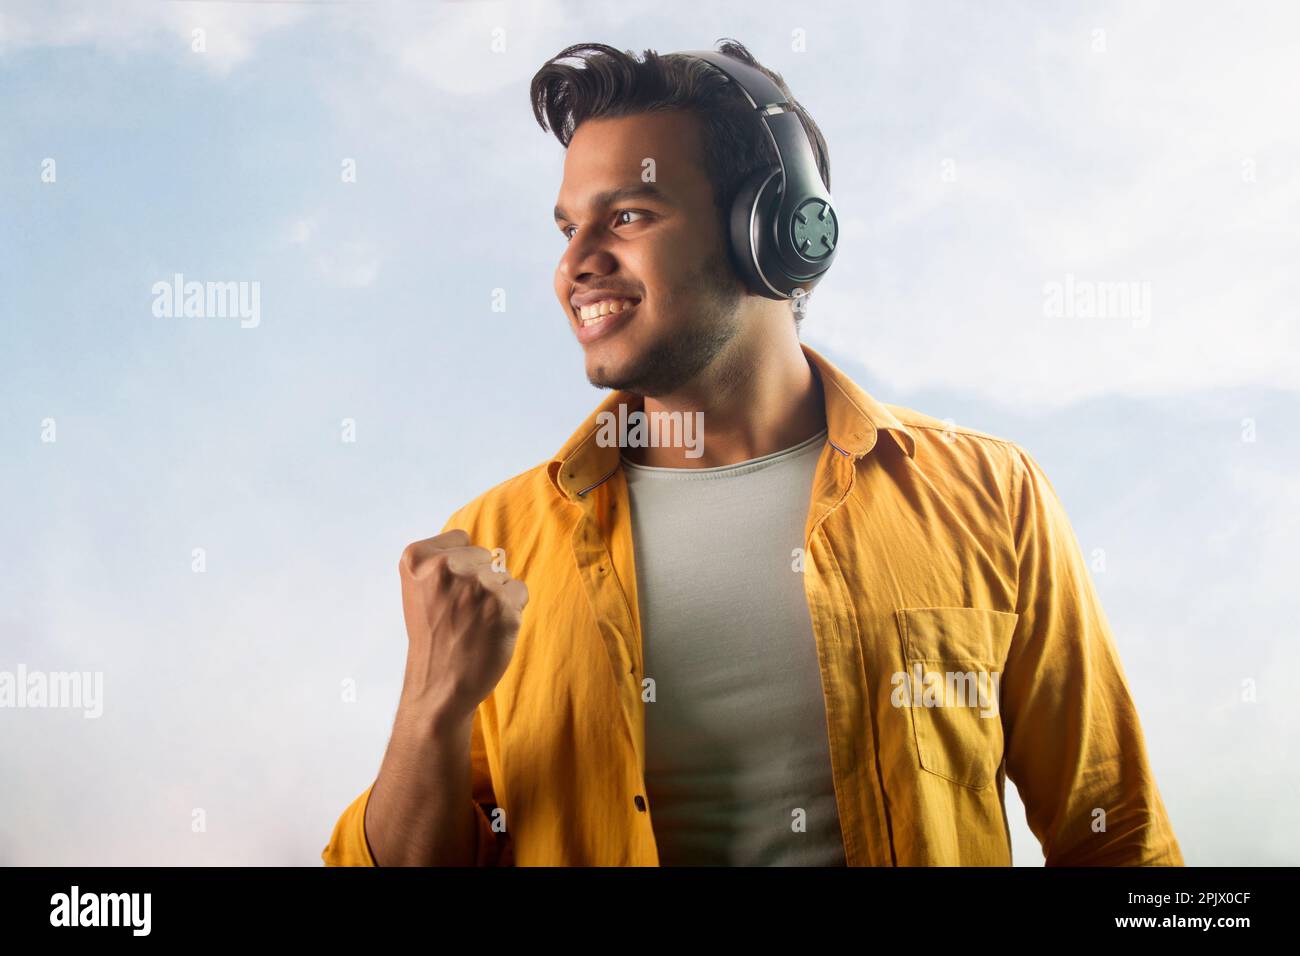 Portrait of a happy young man listening music on headphones Stock Photo